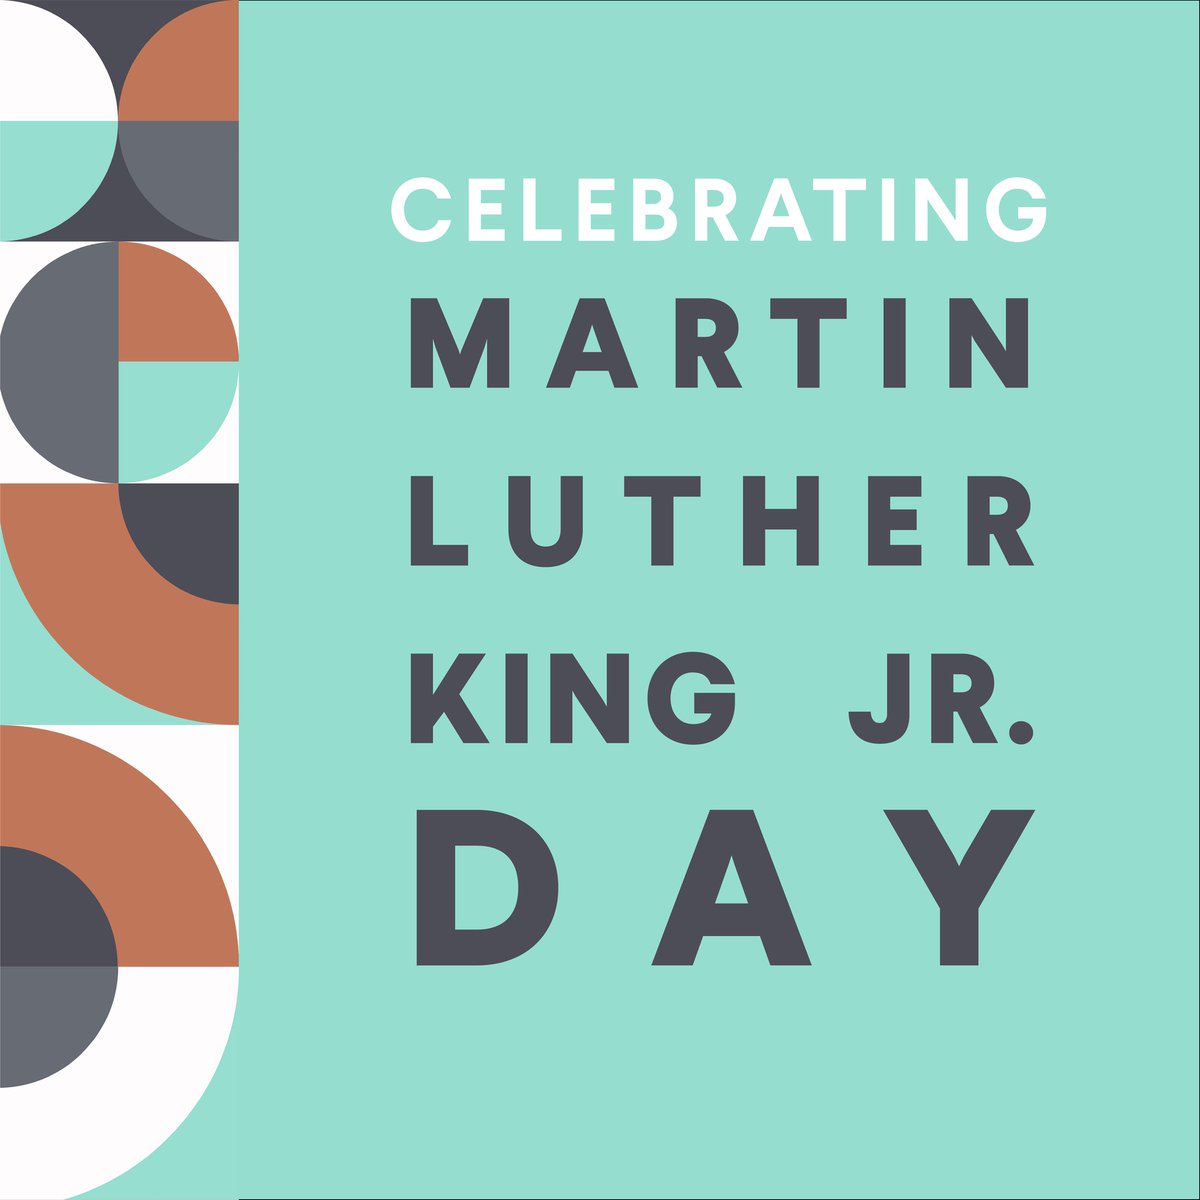 Today, Group 1001 recognizes and celebrates Martin Luther King Jr. Day by closing our offices in observance. King’s activism was revolutionary: use love and pacifism to create social change. What does Martin Luther King Jr. Day mean to you?